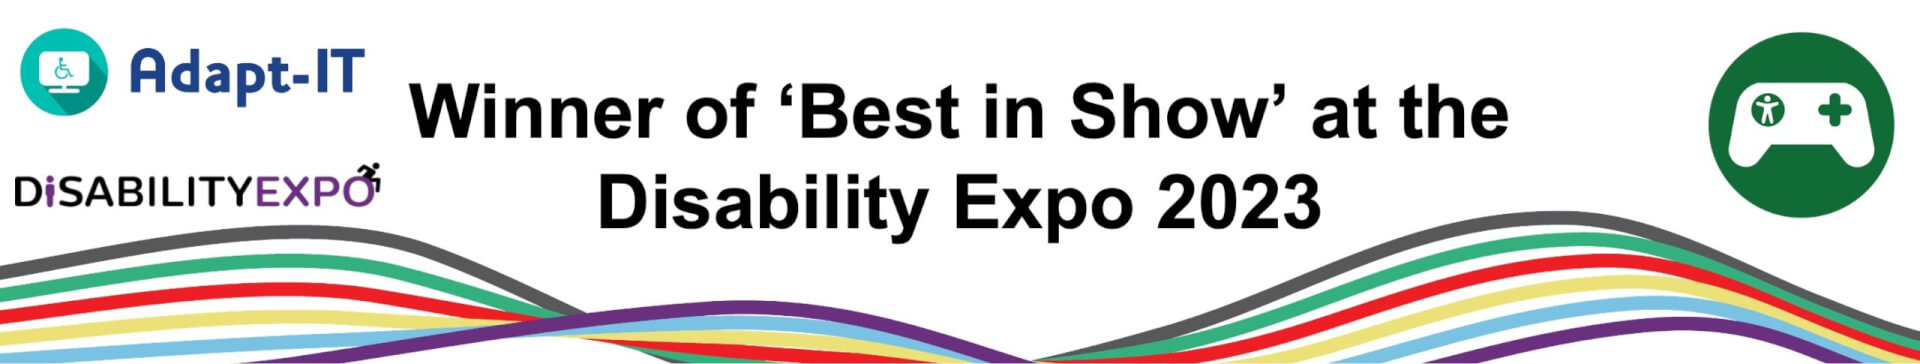 A banner that says Winner of 'Best in Show' at the Disability Expo 2023. Along the bottom of the banner are the Disability Expo rainbow waves. On the left is the Adapt-IT and Disability Expo logos. On the right is the green Gaming Zone logo with a white controller in the middle.